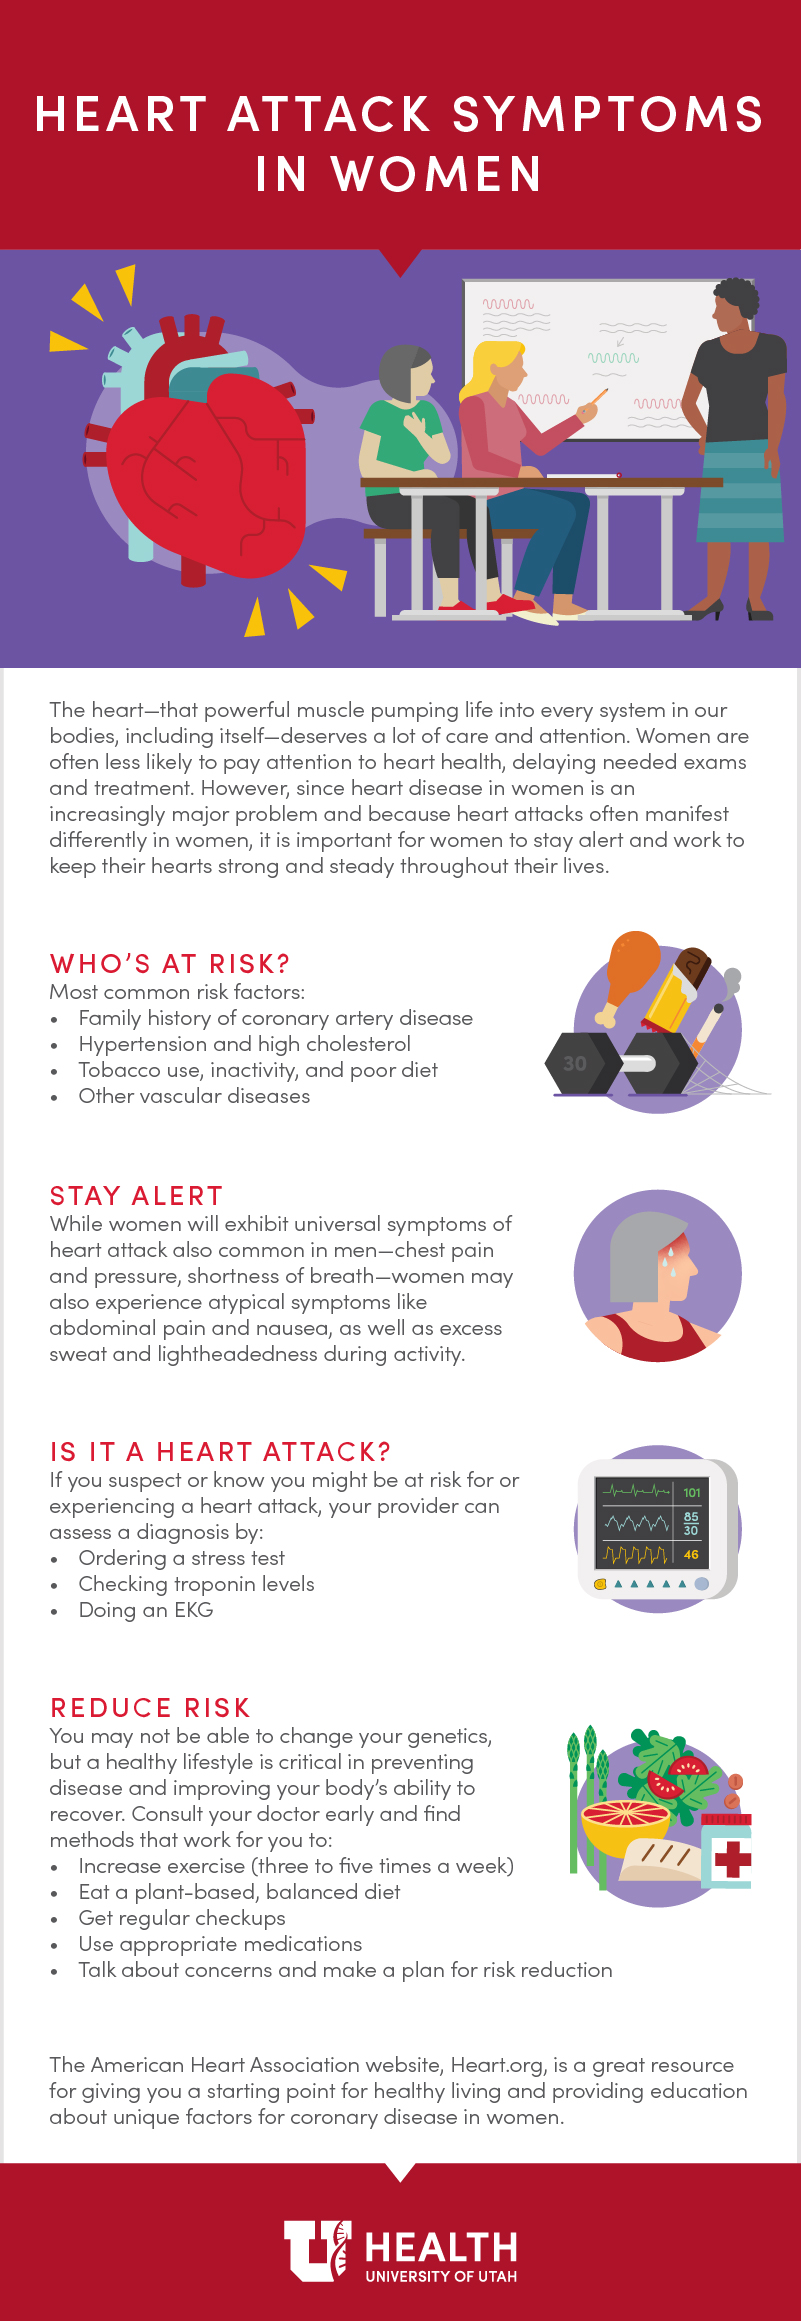 heart attack symptoms in women infographic